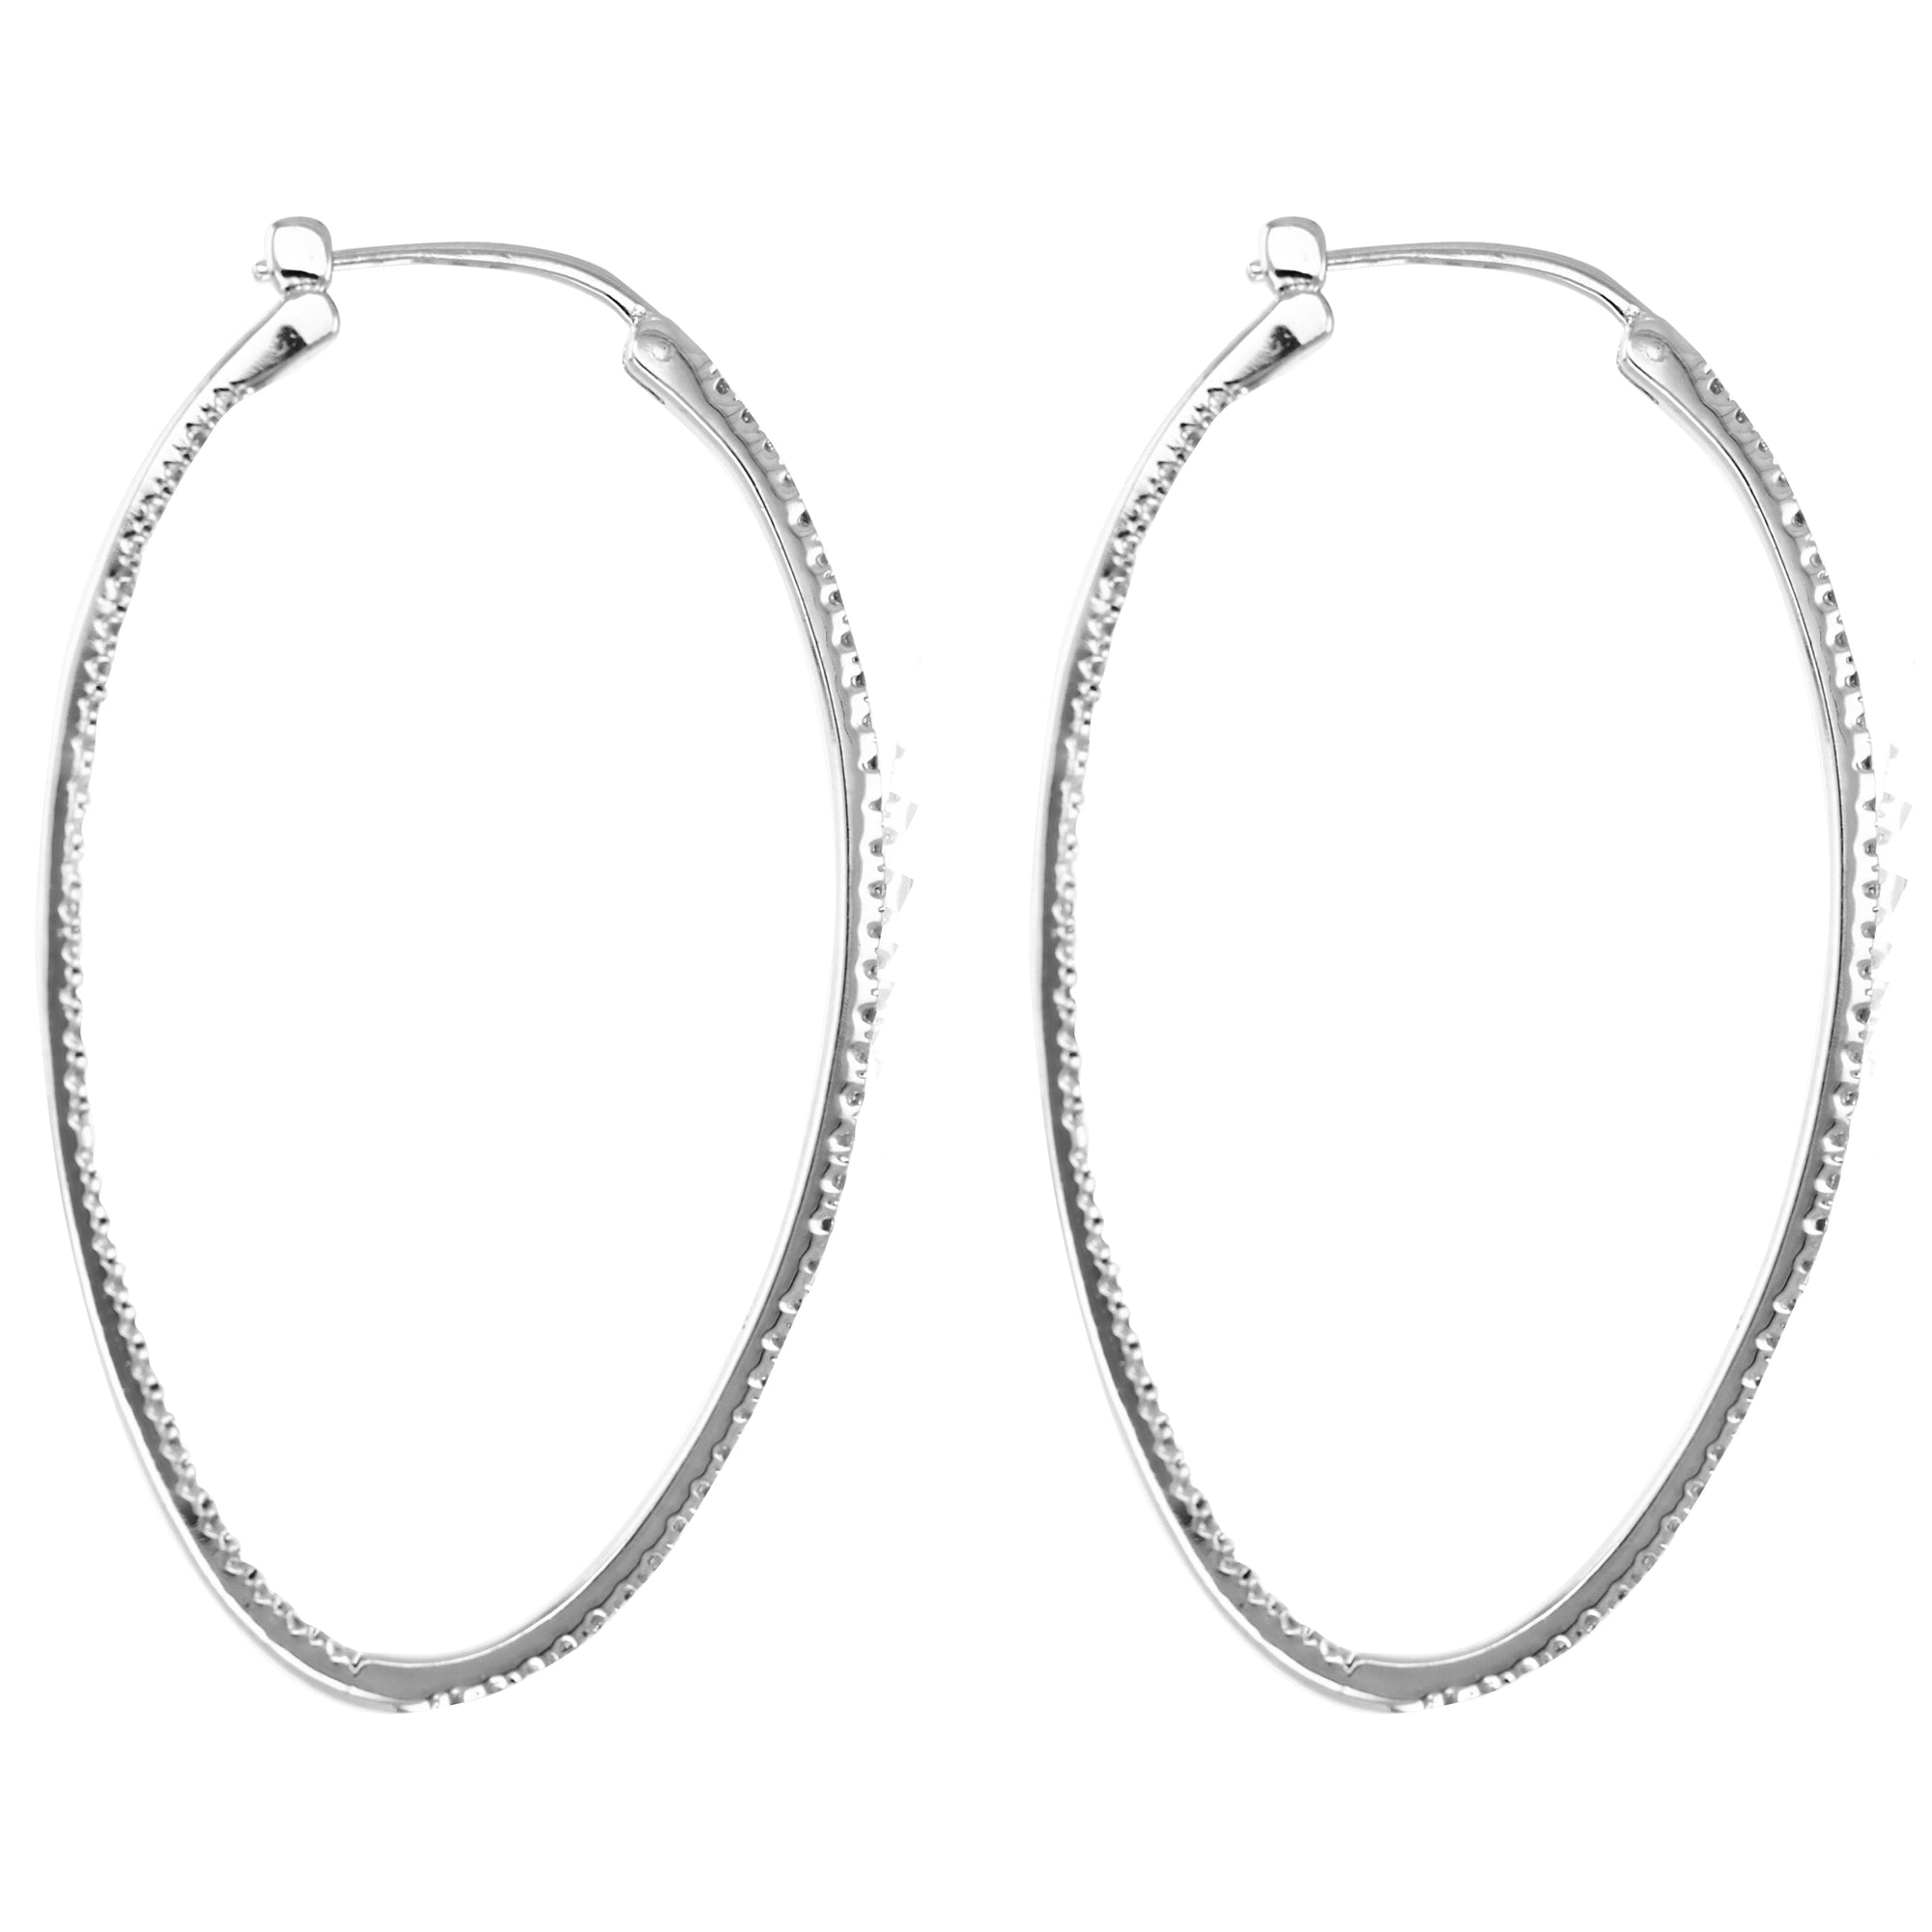 1 cttw Diamond Inside Out Hoop Earrings 14K White Gold Round Prong Set 2 Inch